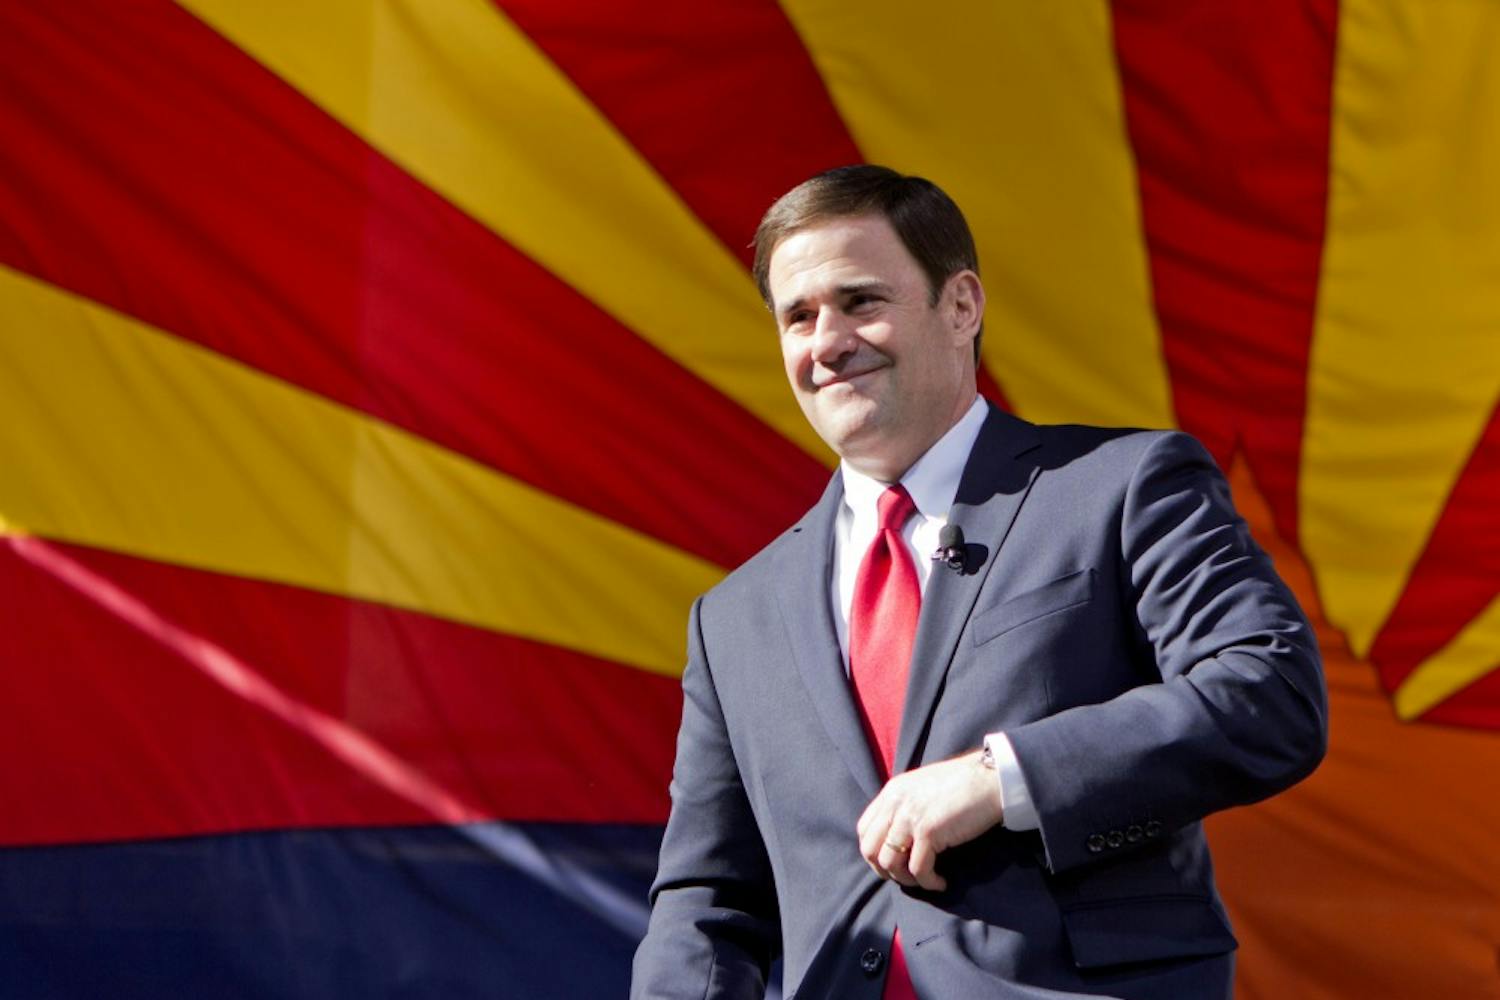 Gov. Doug Ducey walks on stage to take his oath of office at the state Capitol courtyard on Jan. 5, 2015.